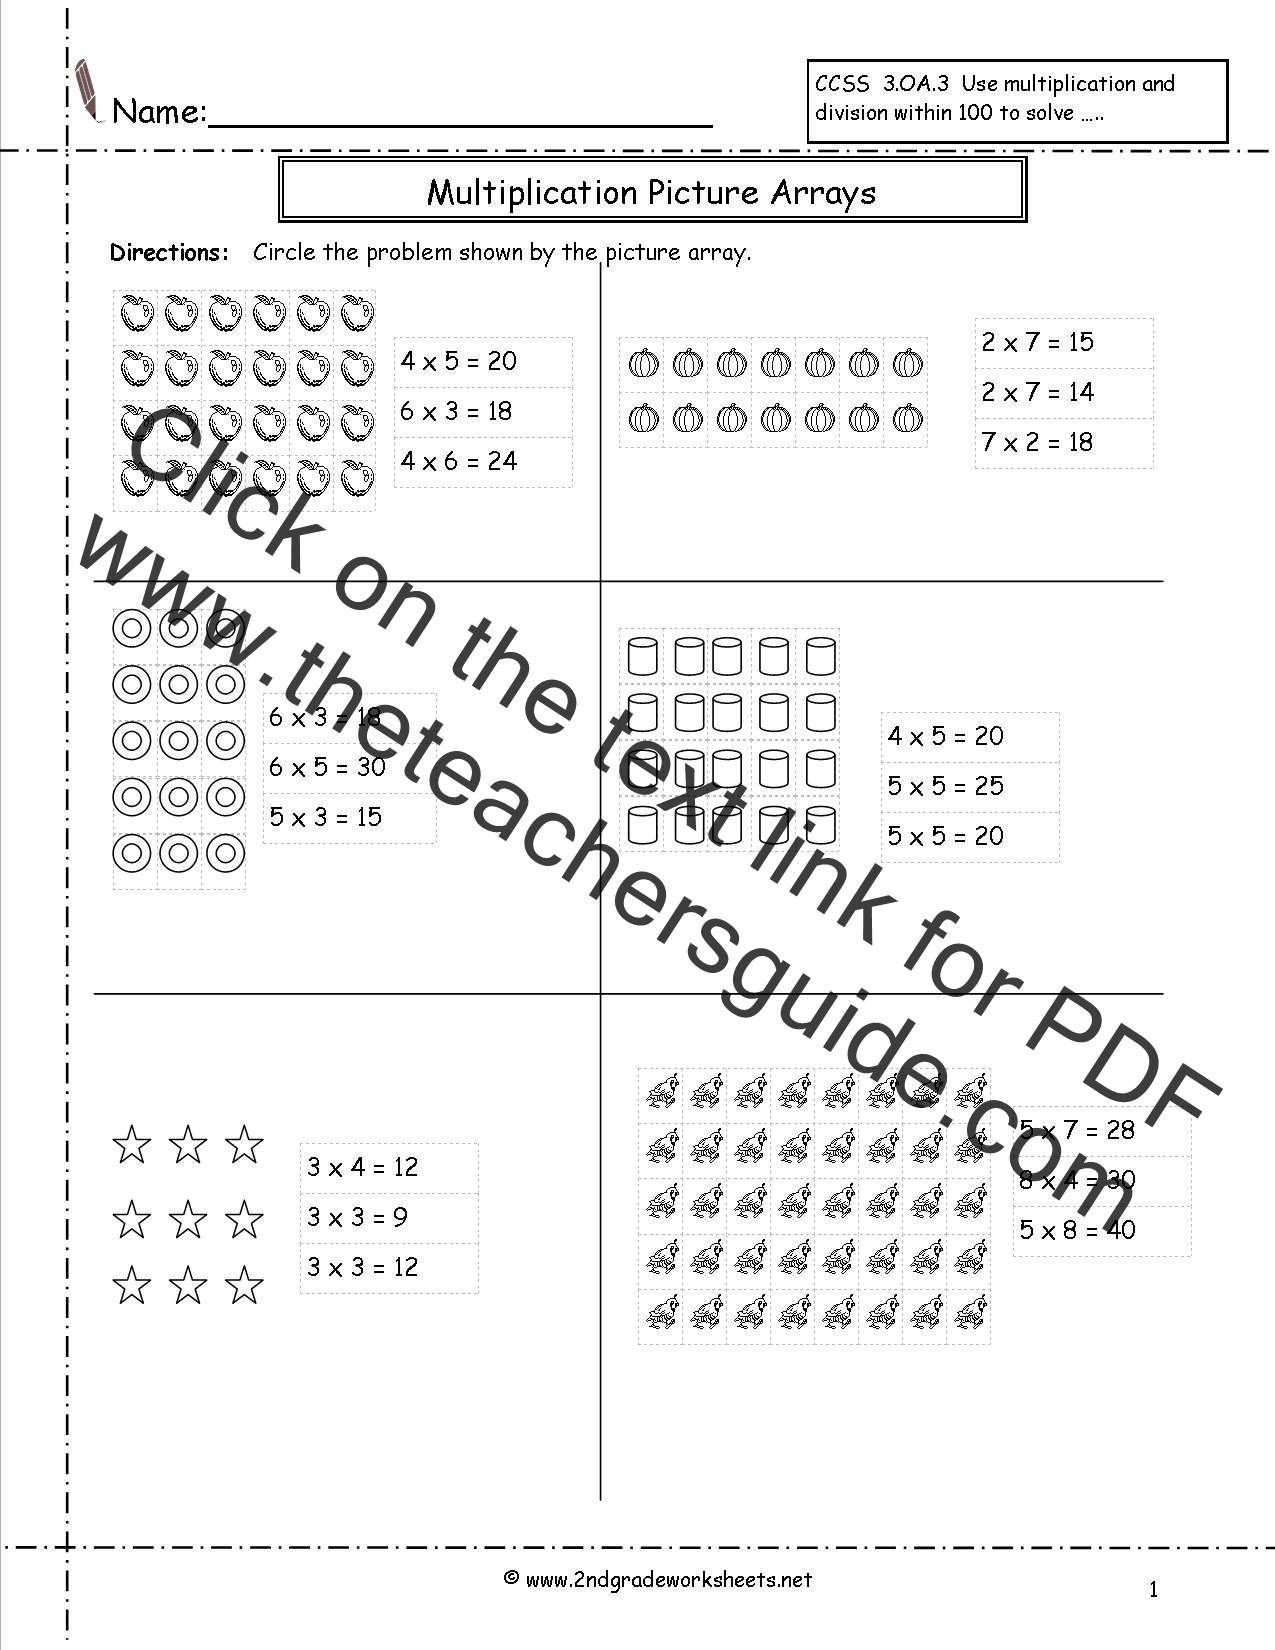  Arrays Worksheets 3rd Grade Search Results Calendar 2015